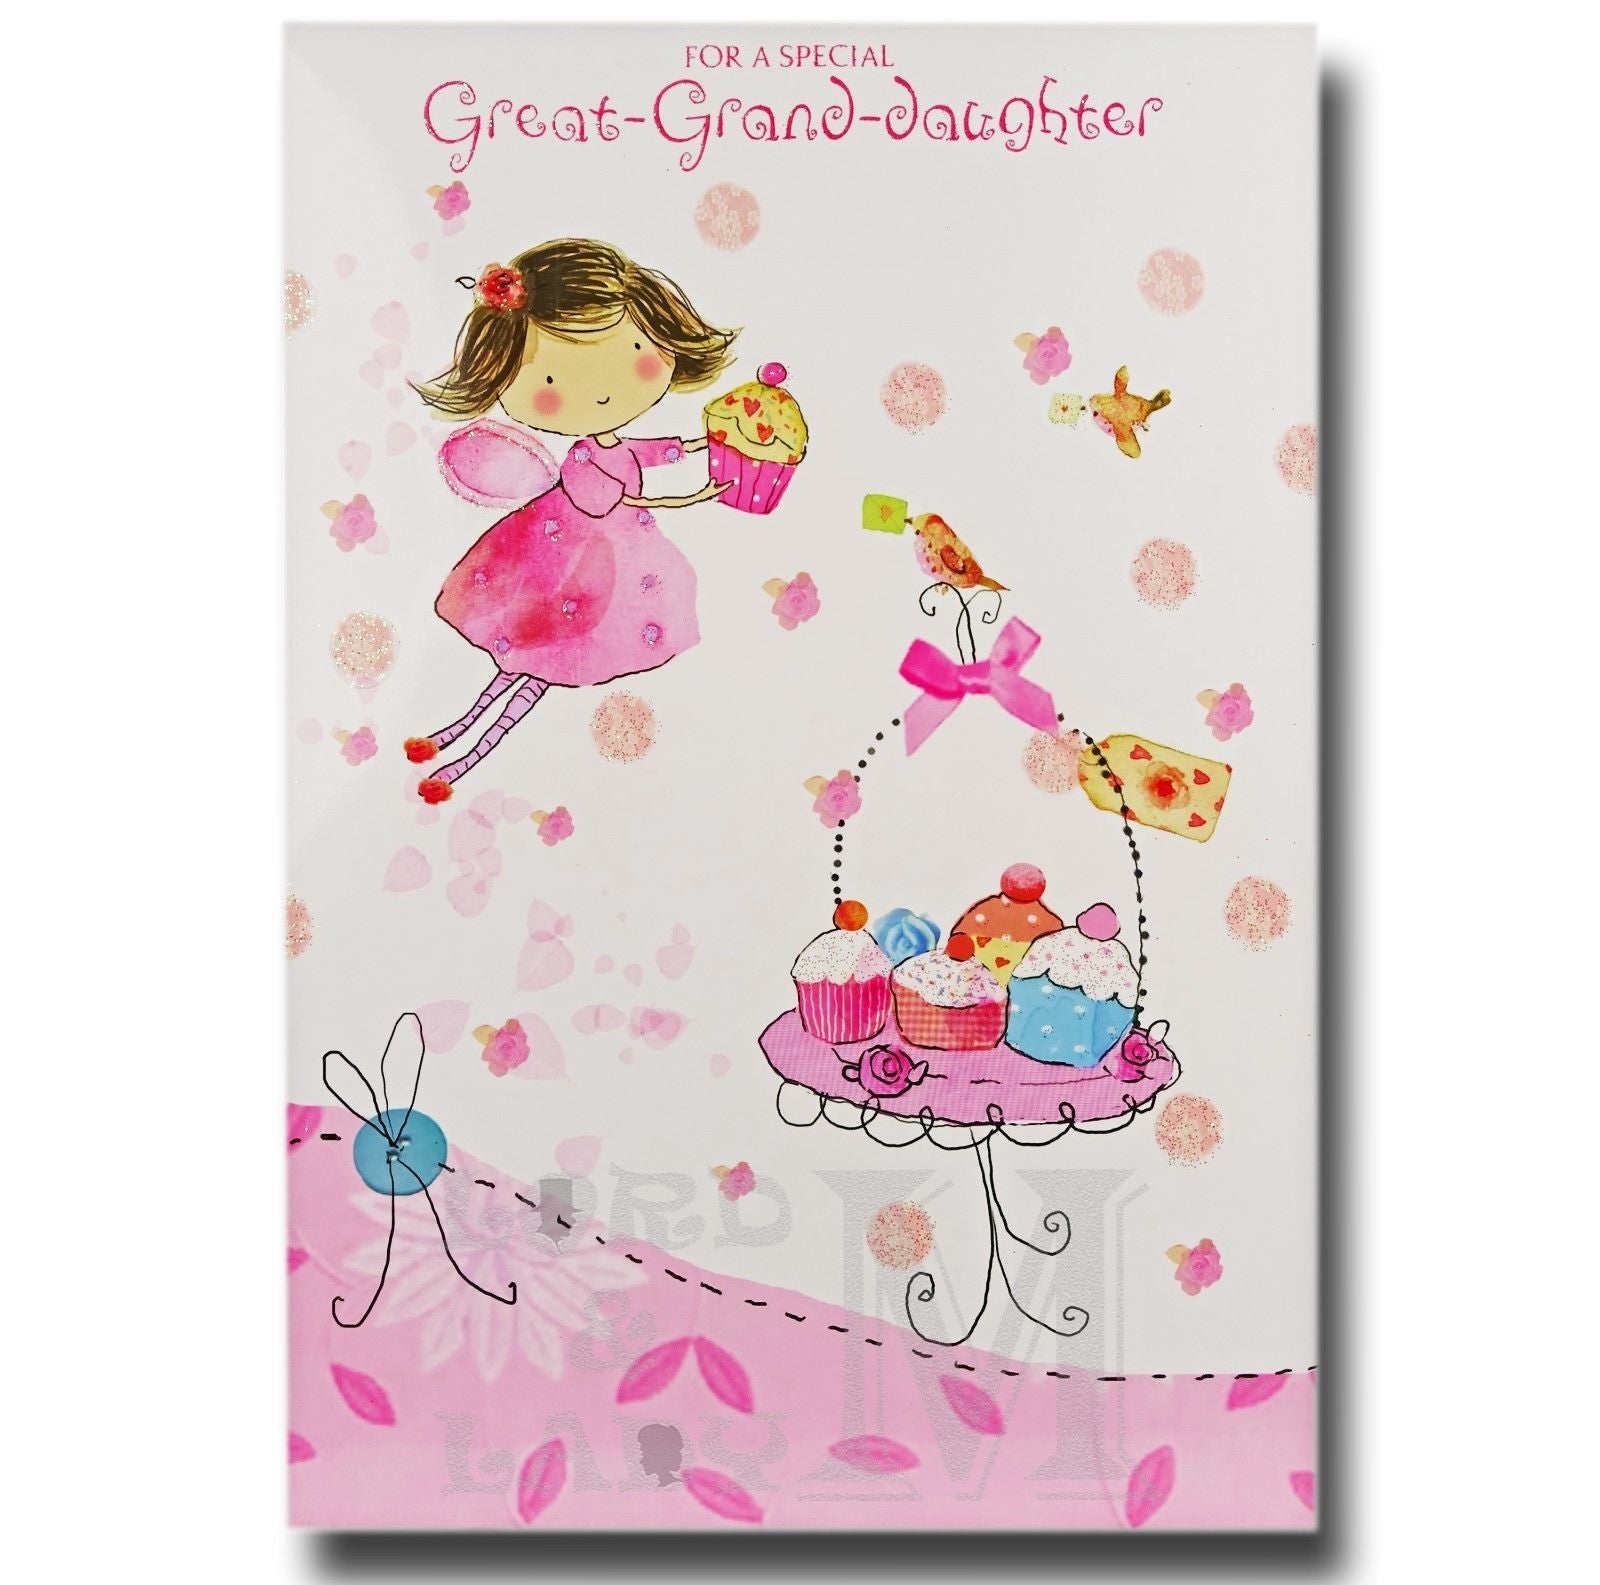 20cm - For A Special Great-Grand-Daughter - E